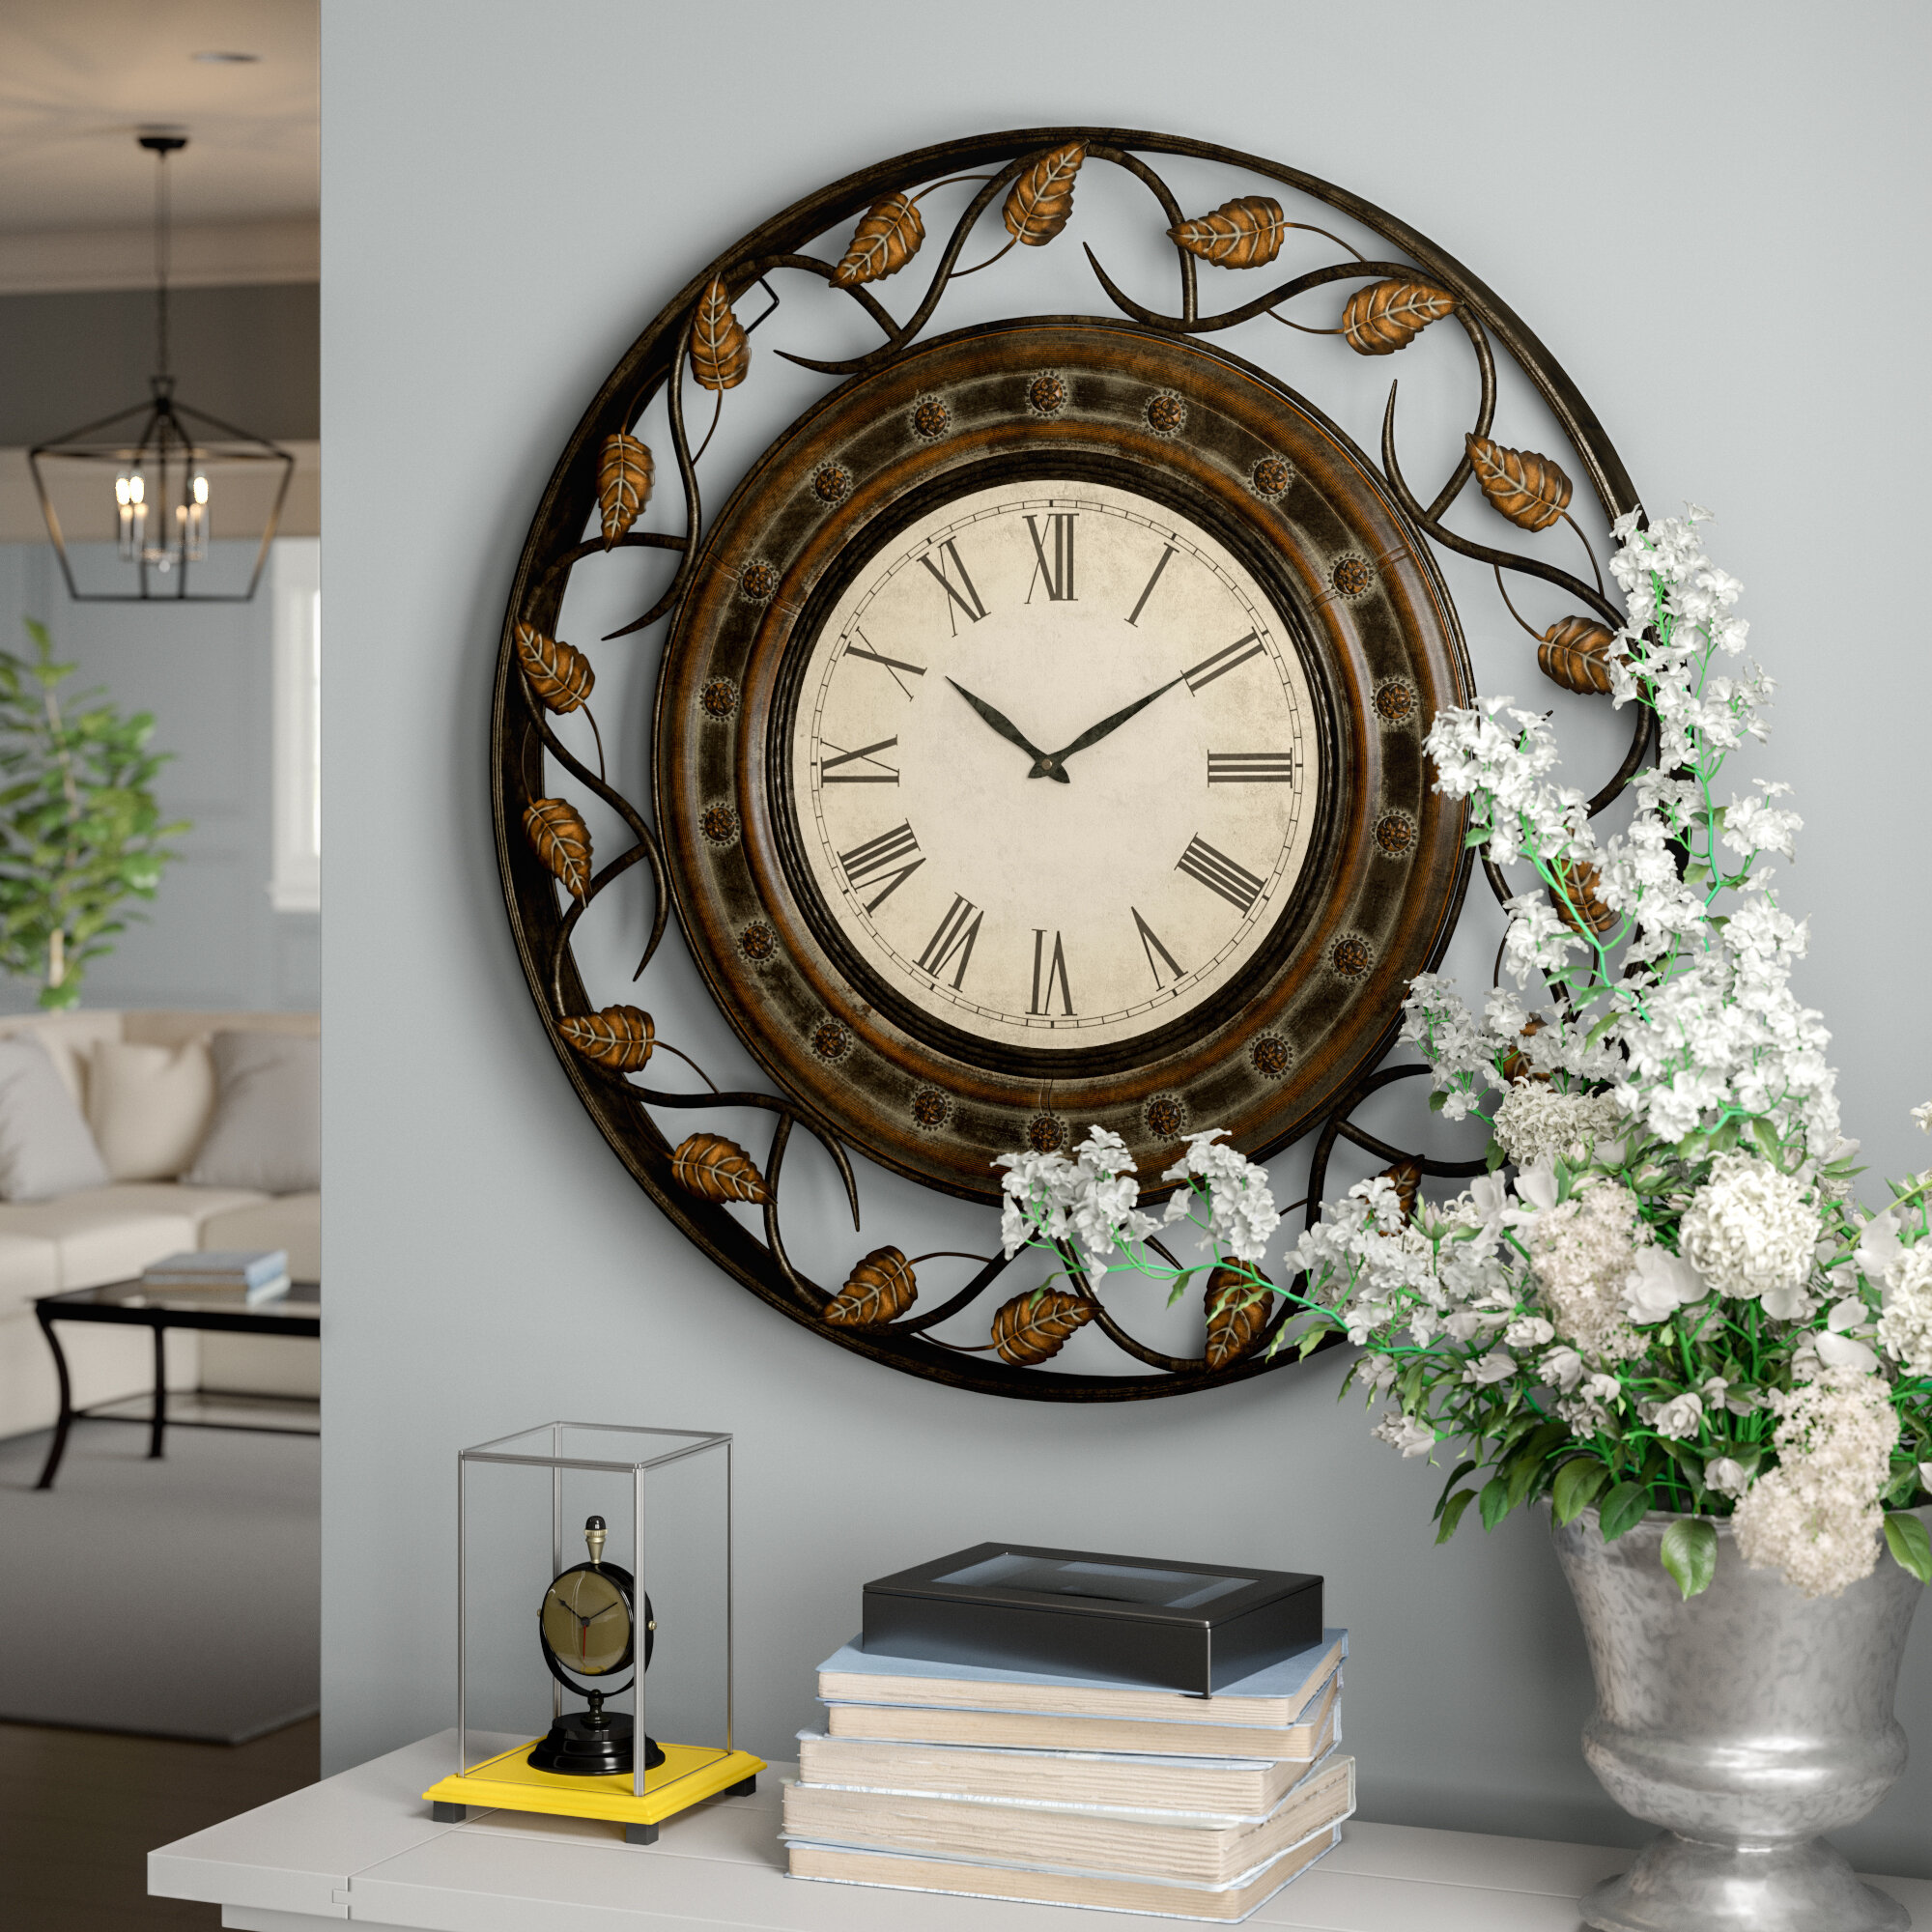 List 98+ Images how to decorate around a large clock Stunning